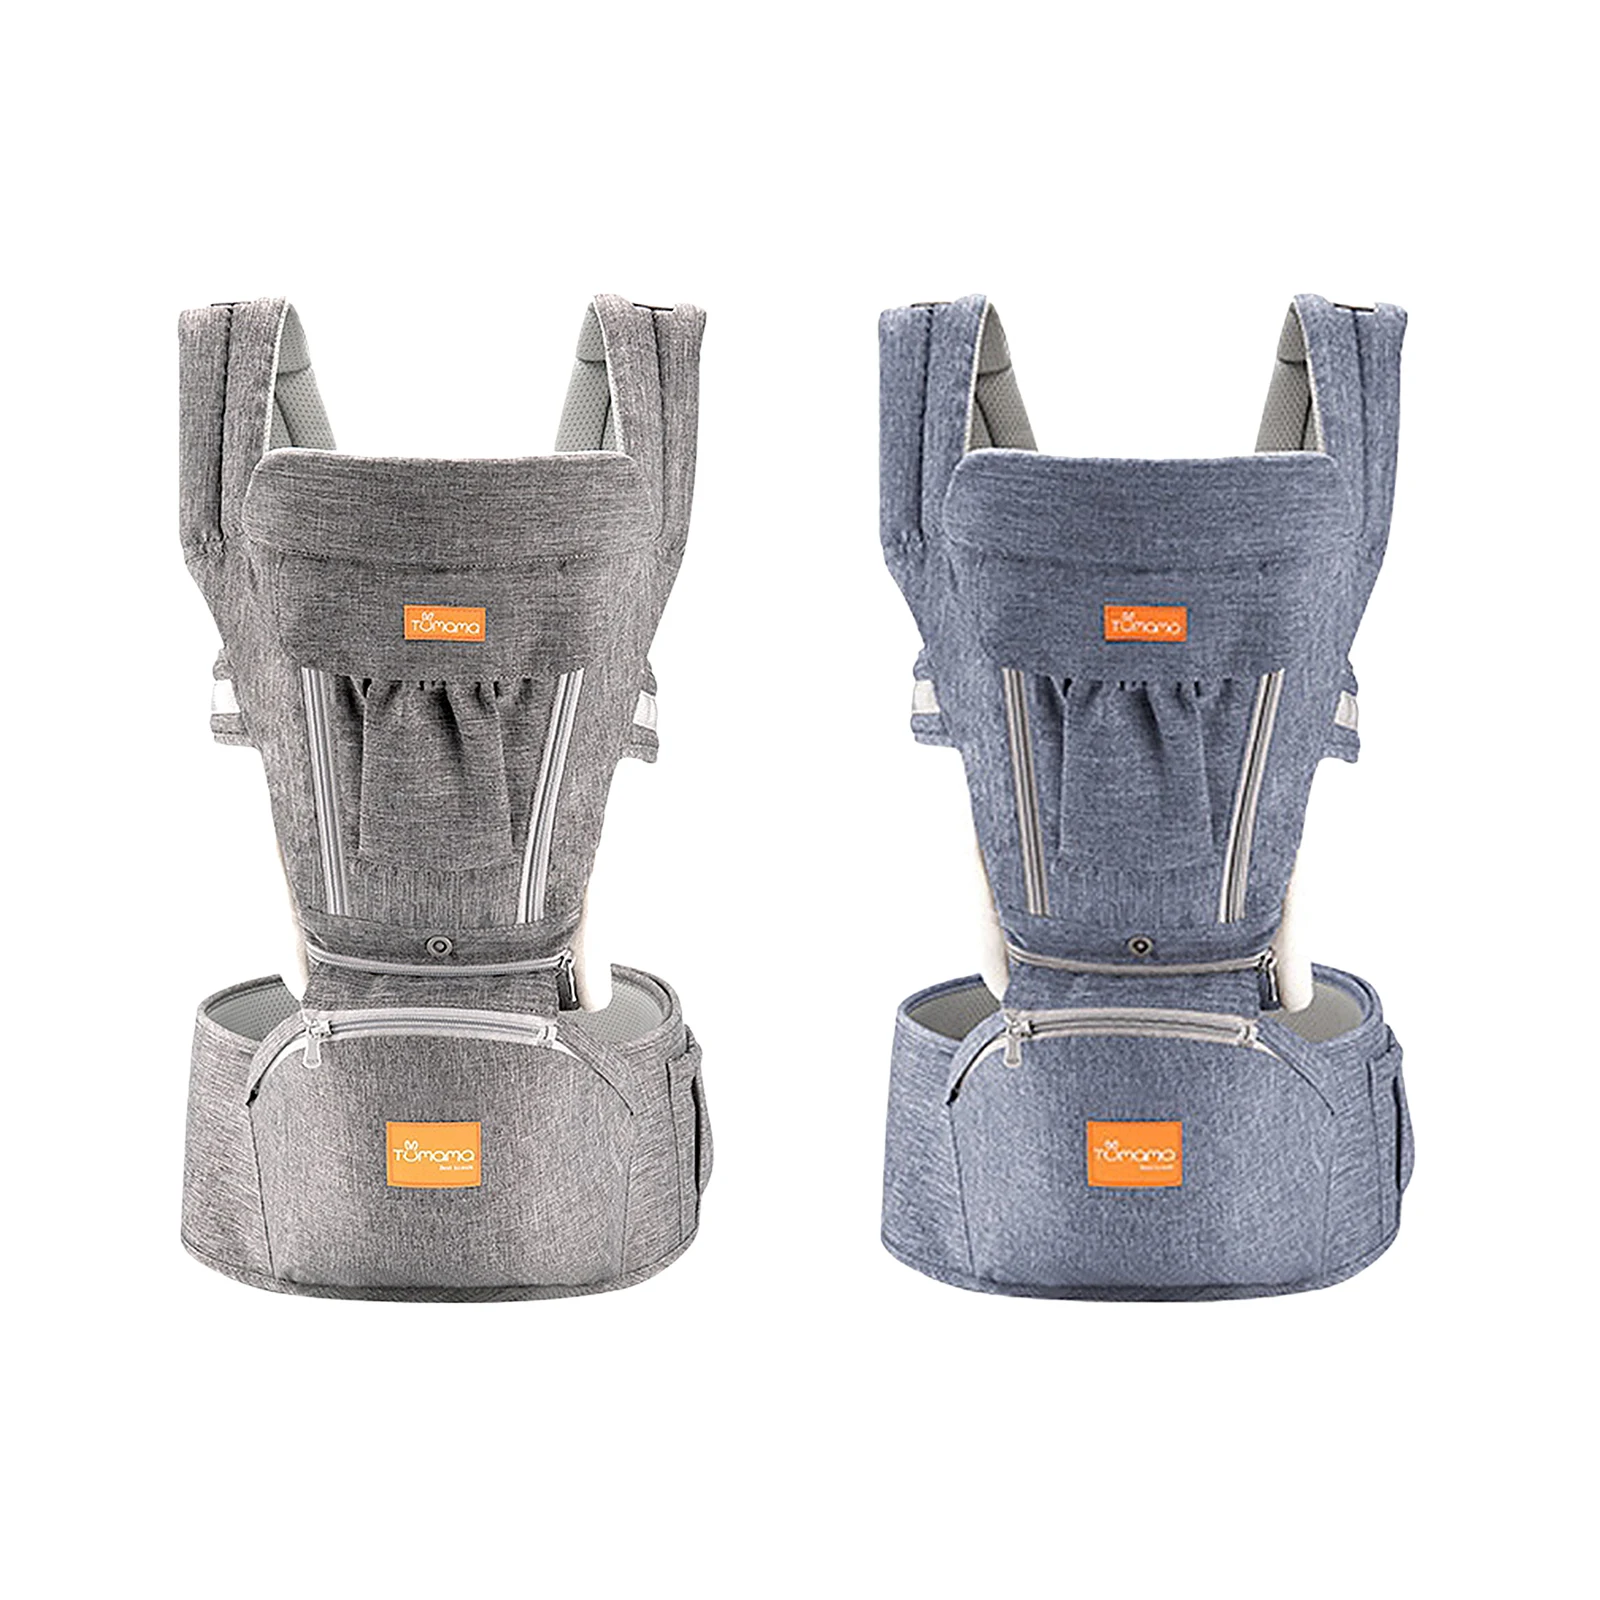 Baby Carrier Infant Hipseat Sling Front Facing Baby Wrap Carrier 3 in 1 Baby Carrier Hip Seat